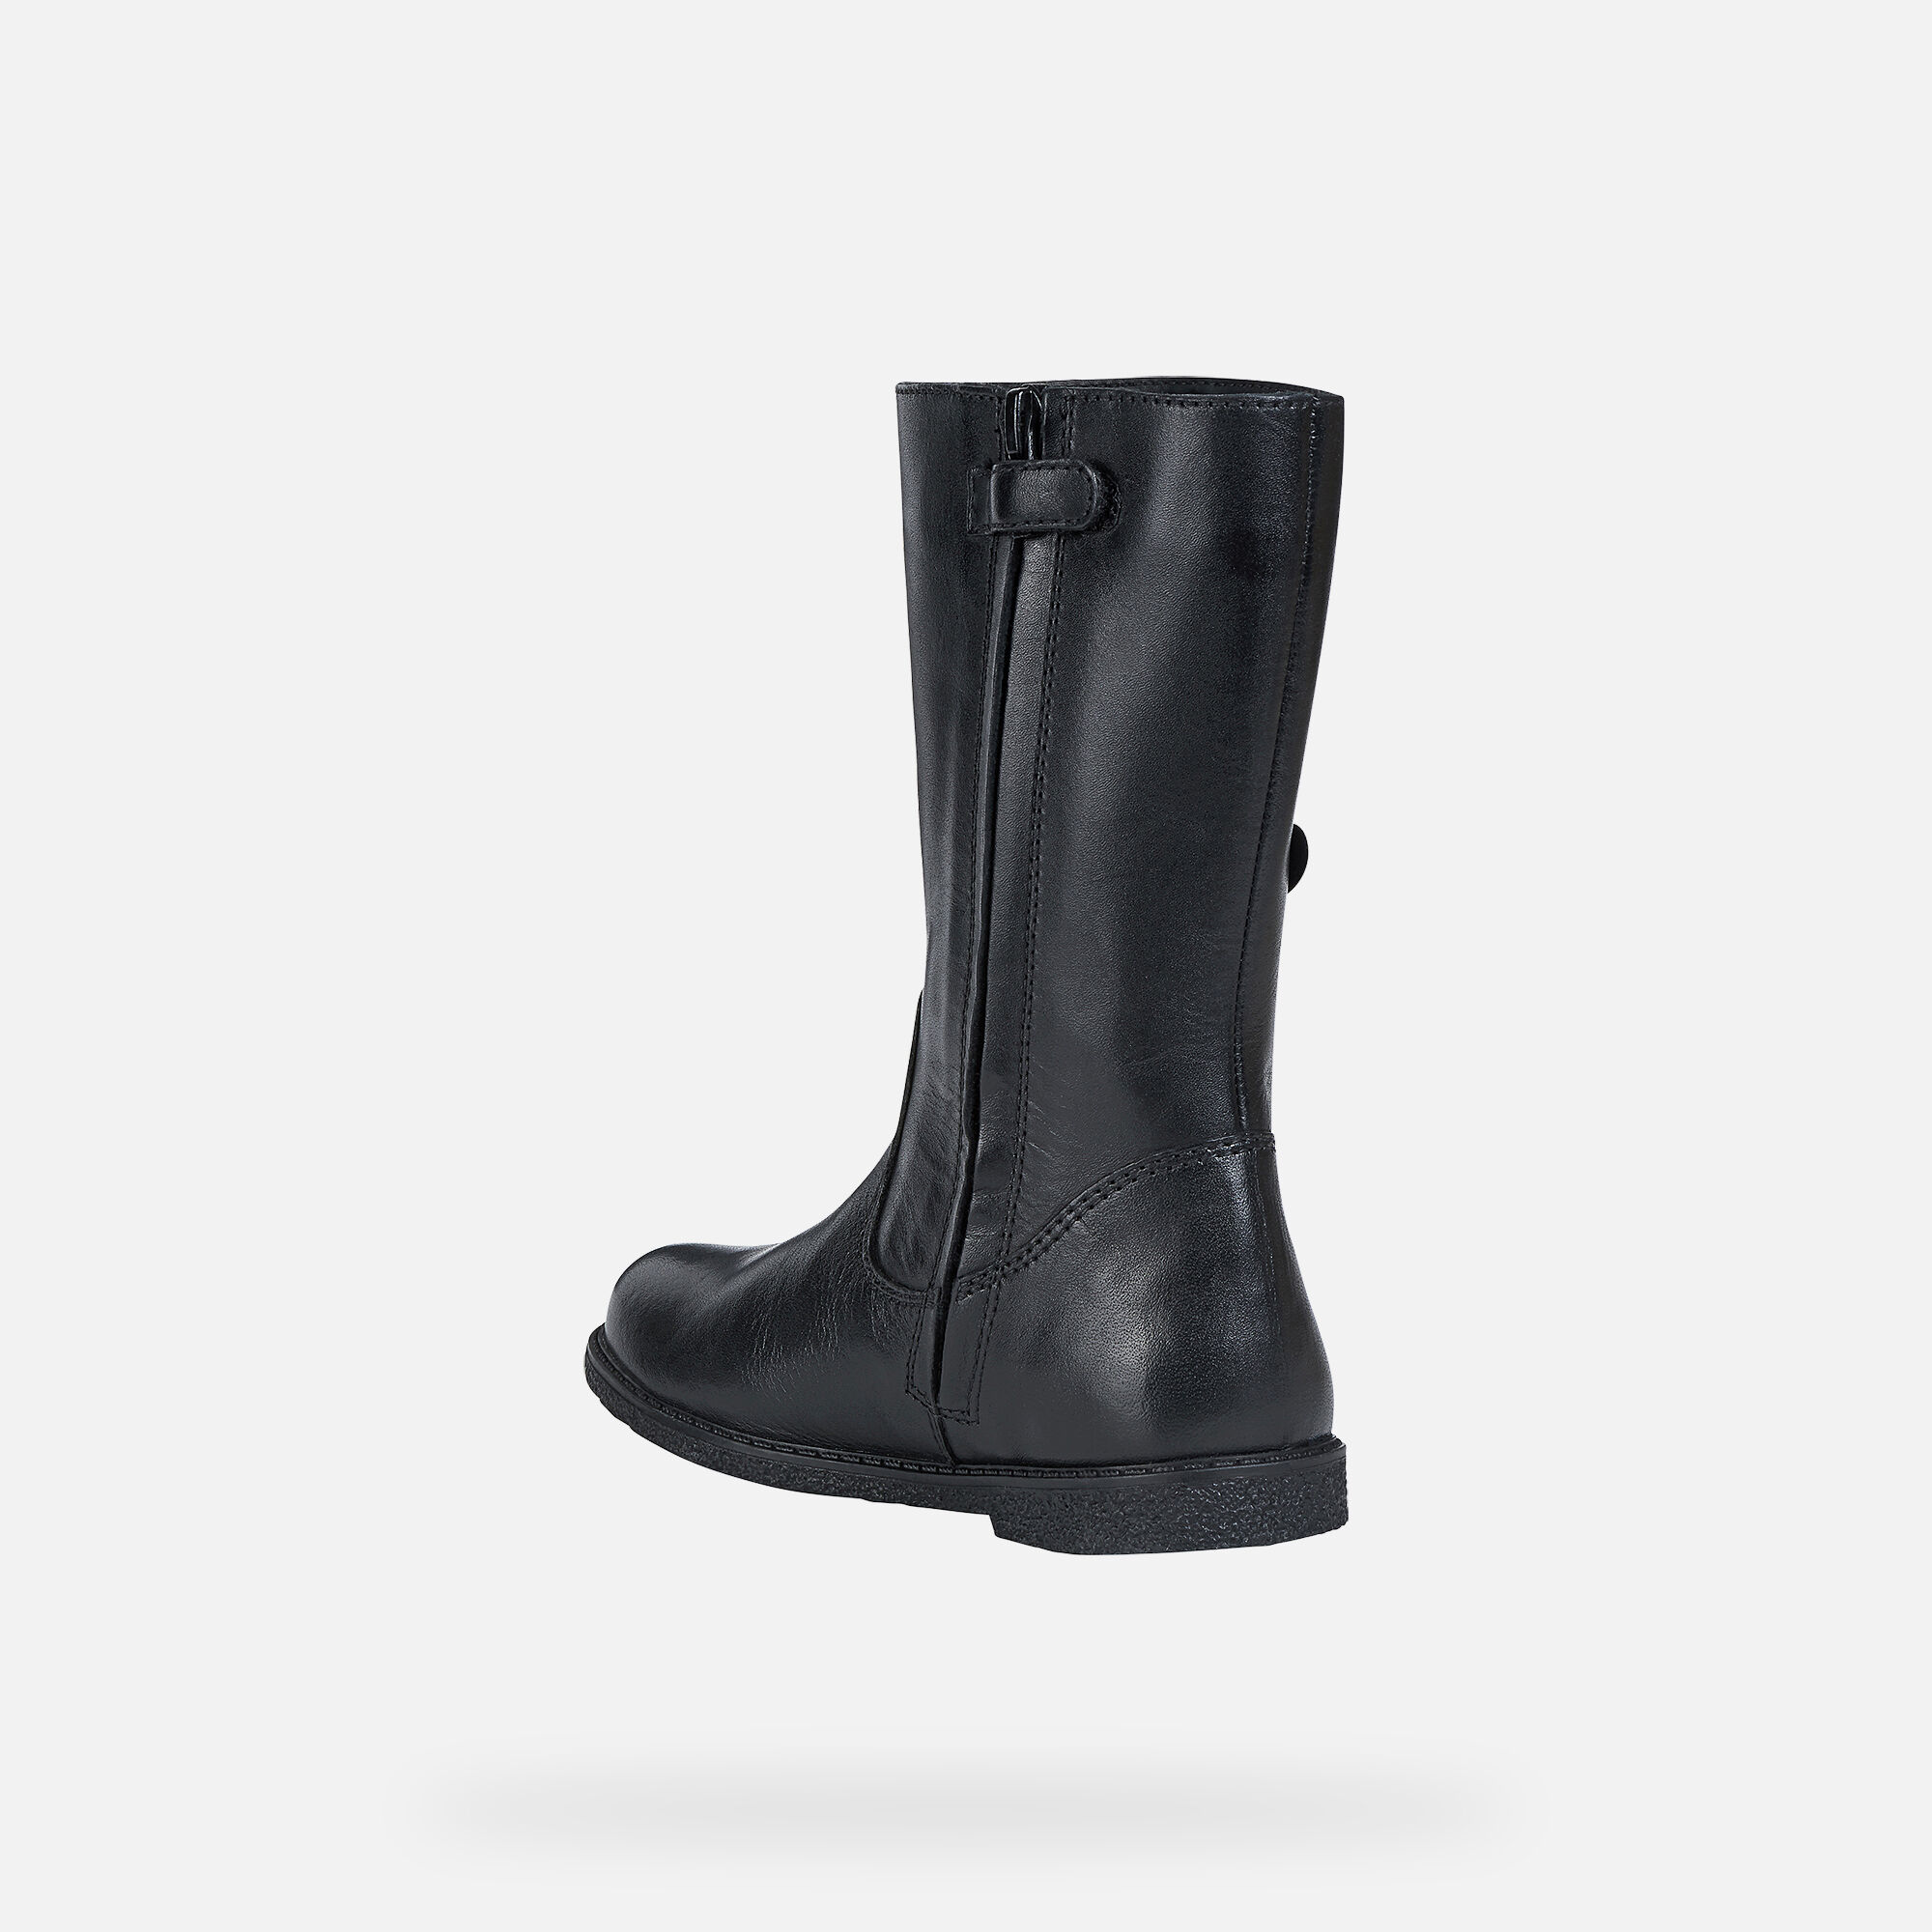 SHAWNTEL GIRL - BOOTS from girls | Geox